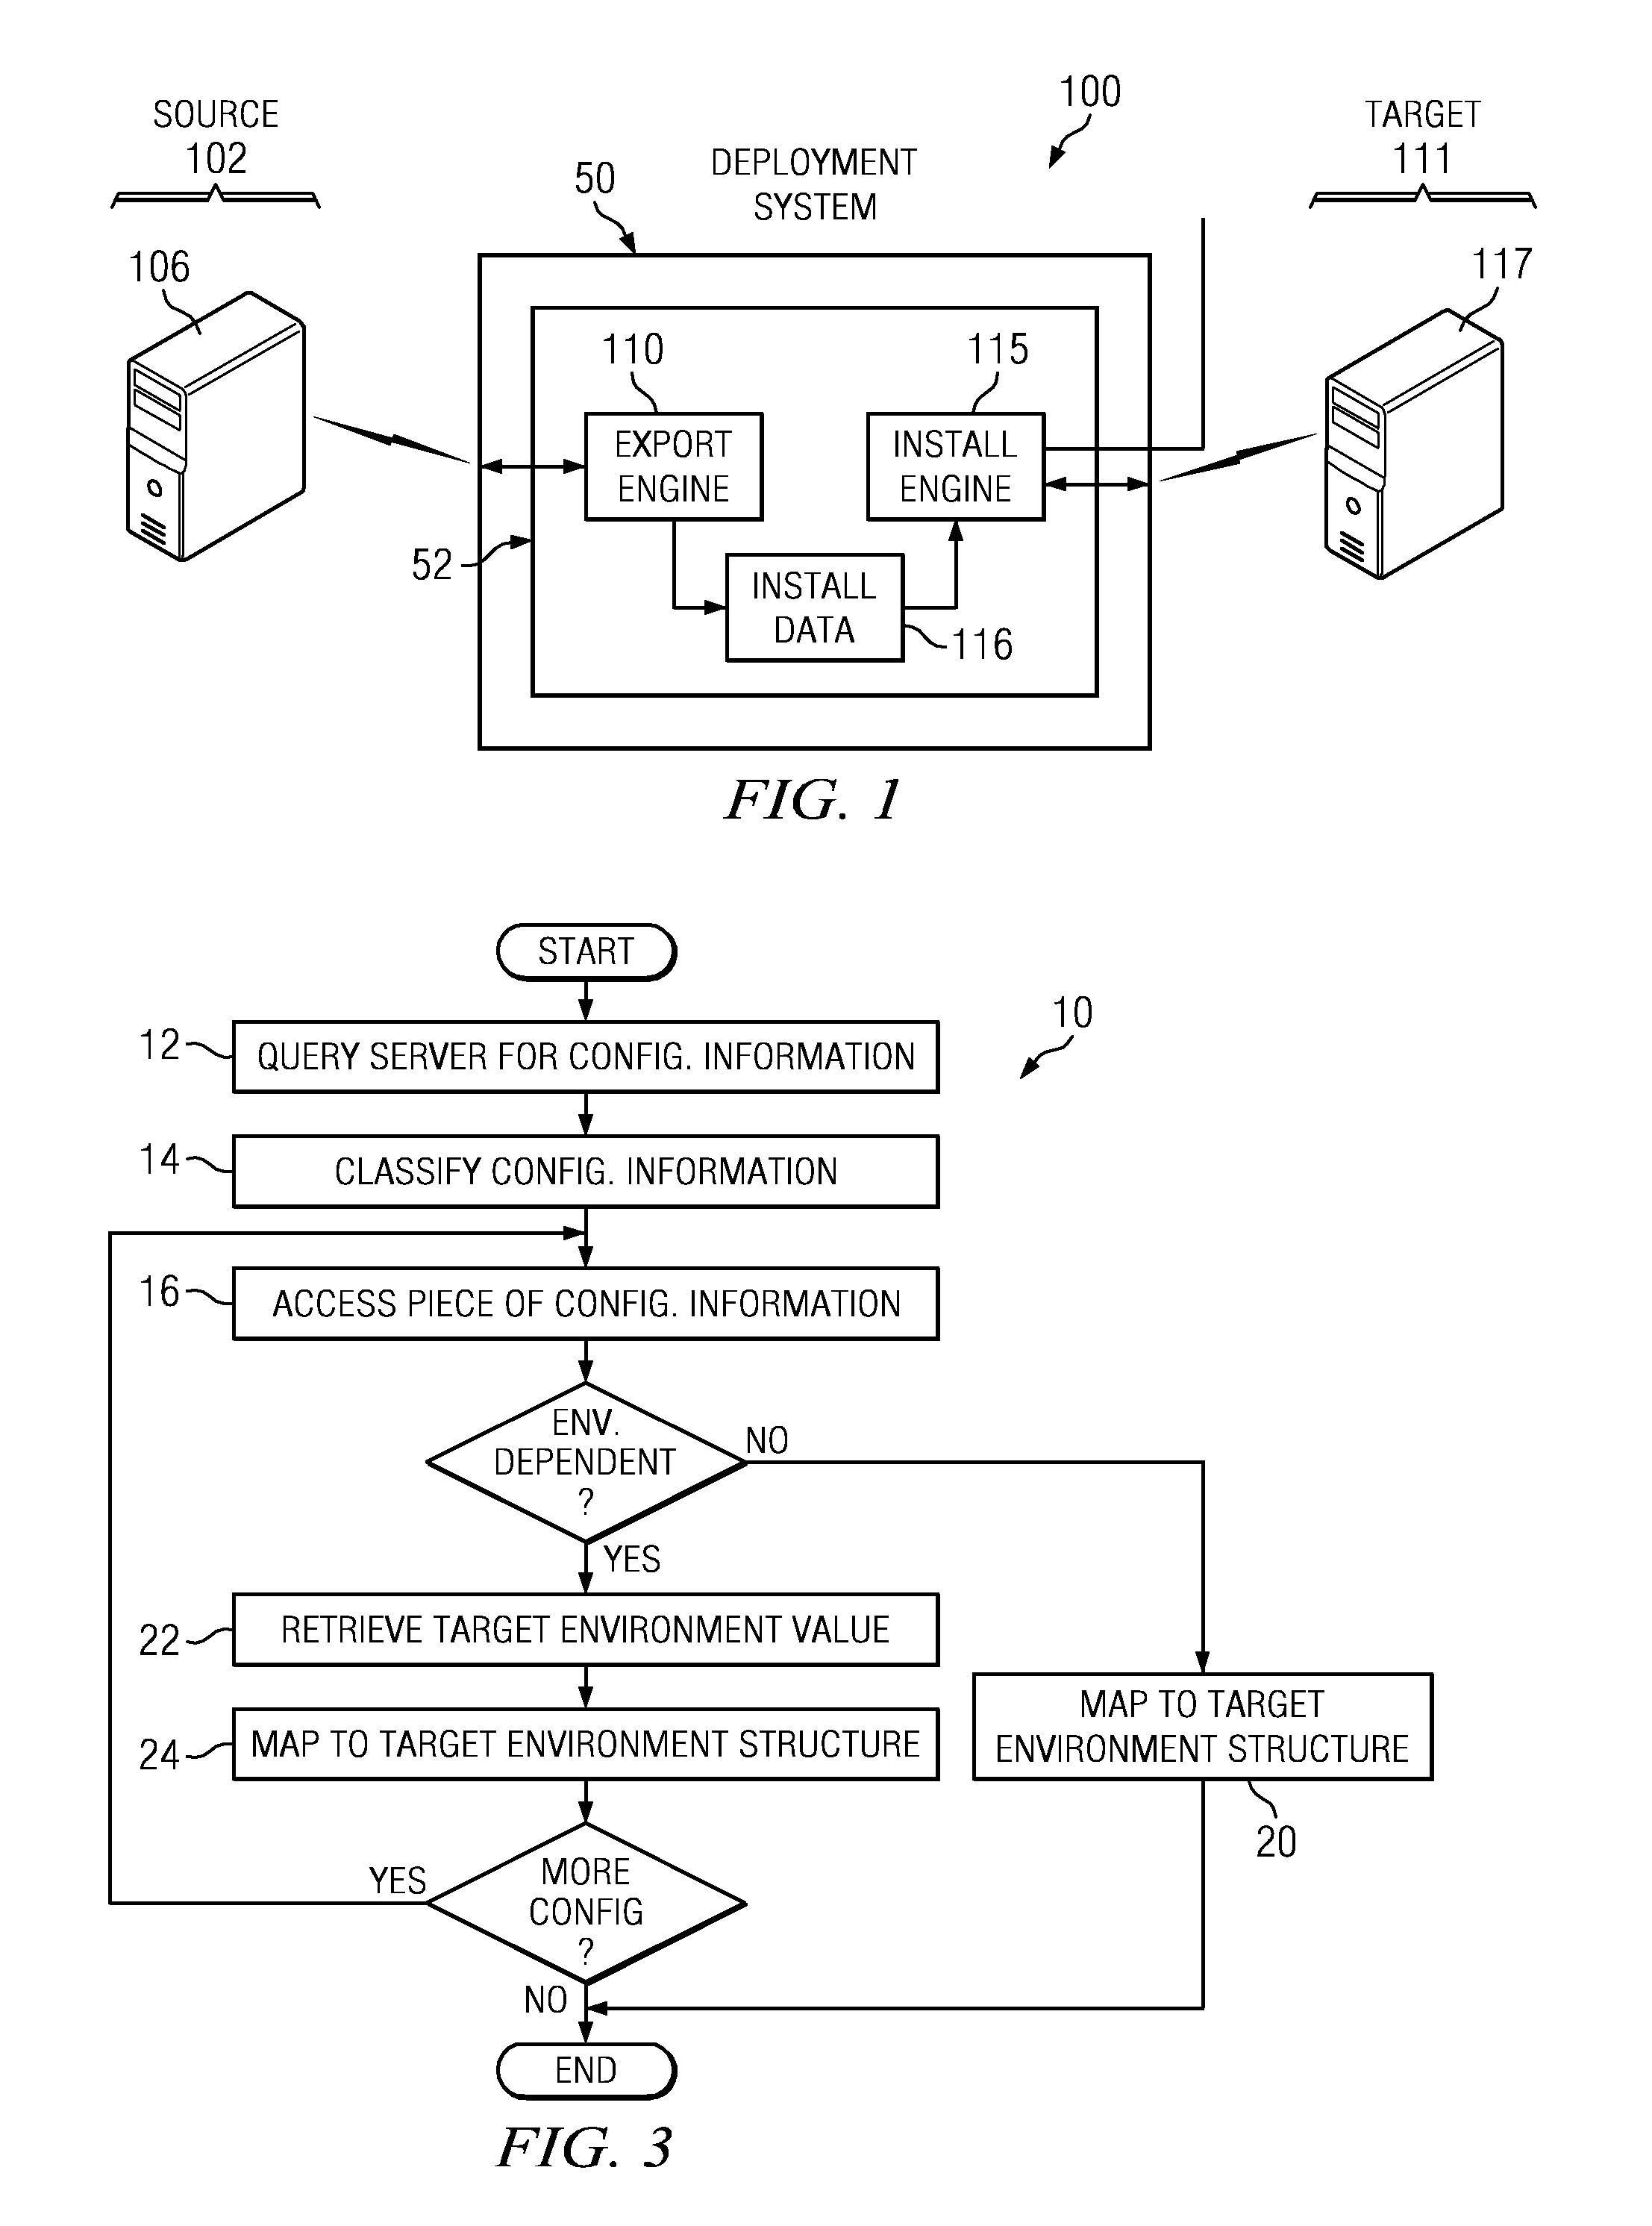 System and method for cloud provisioning and application deployment